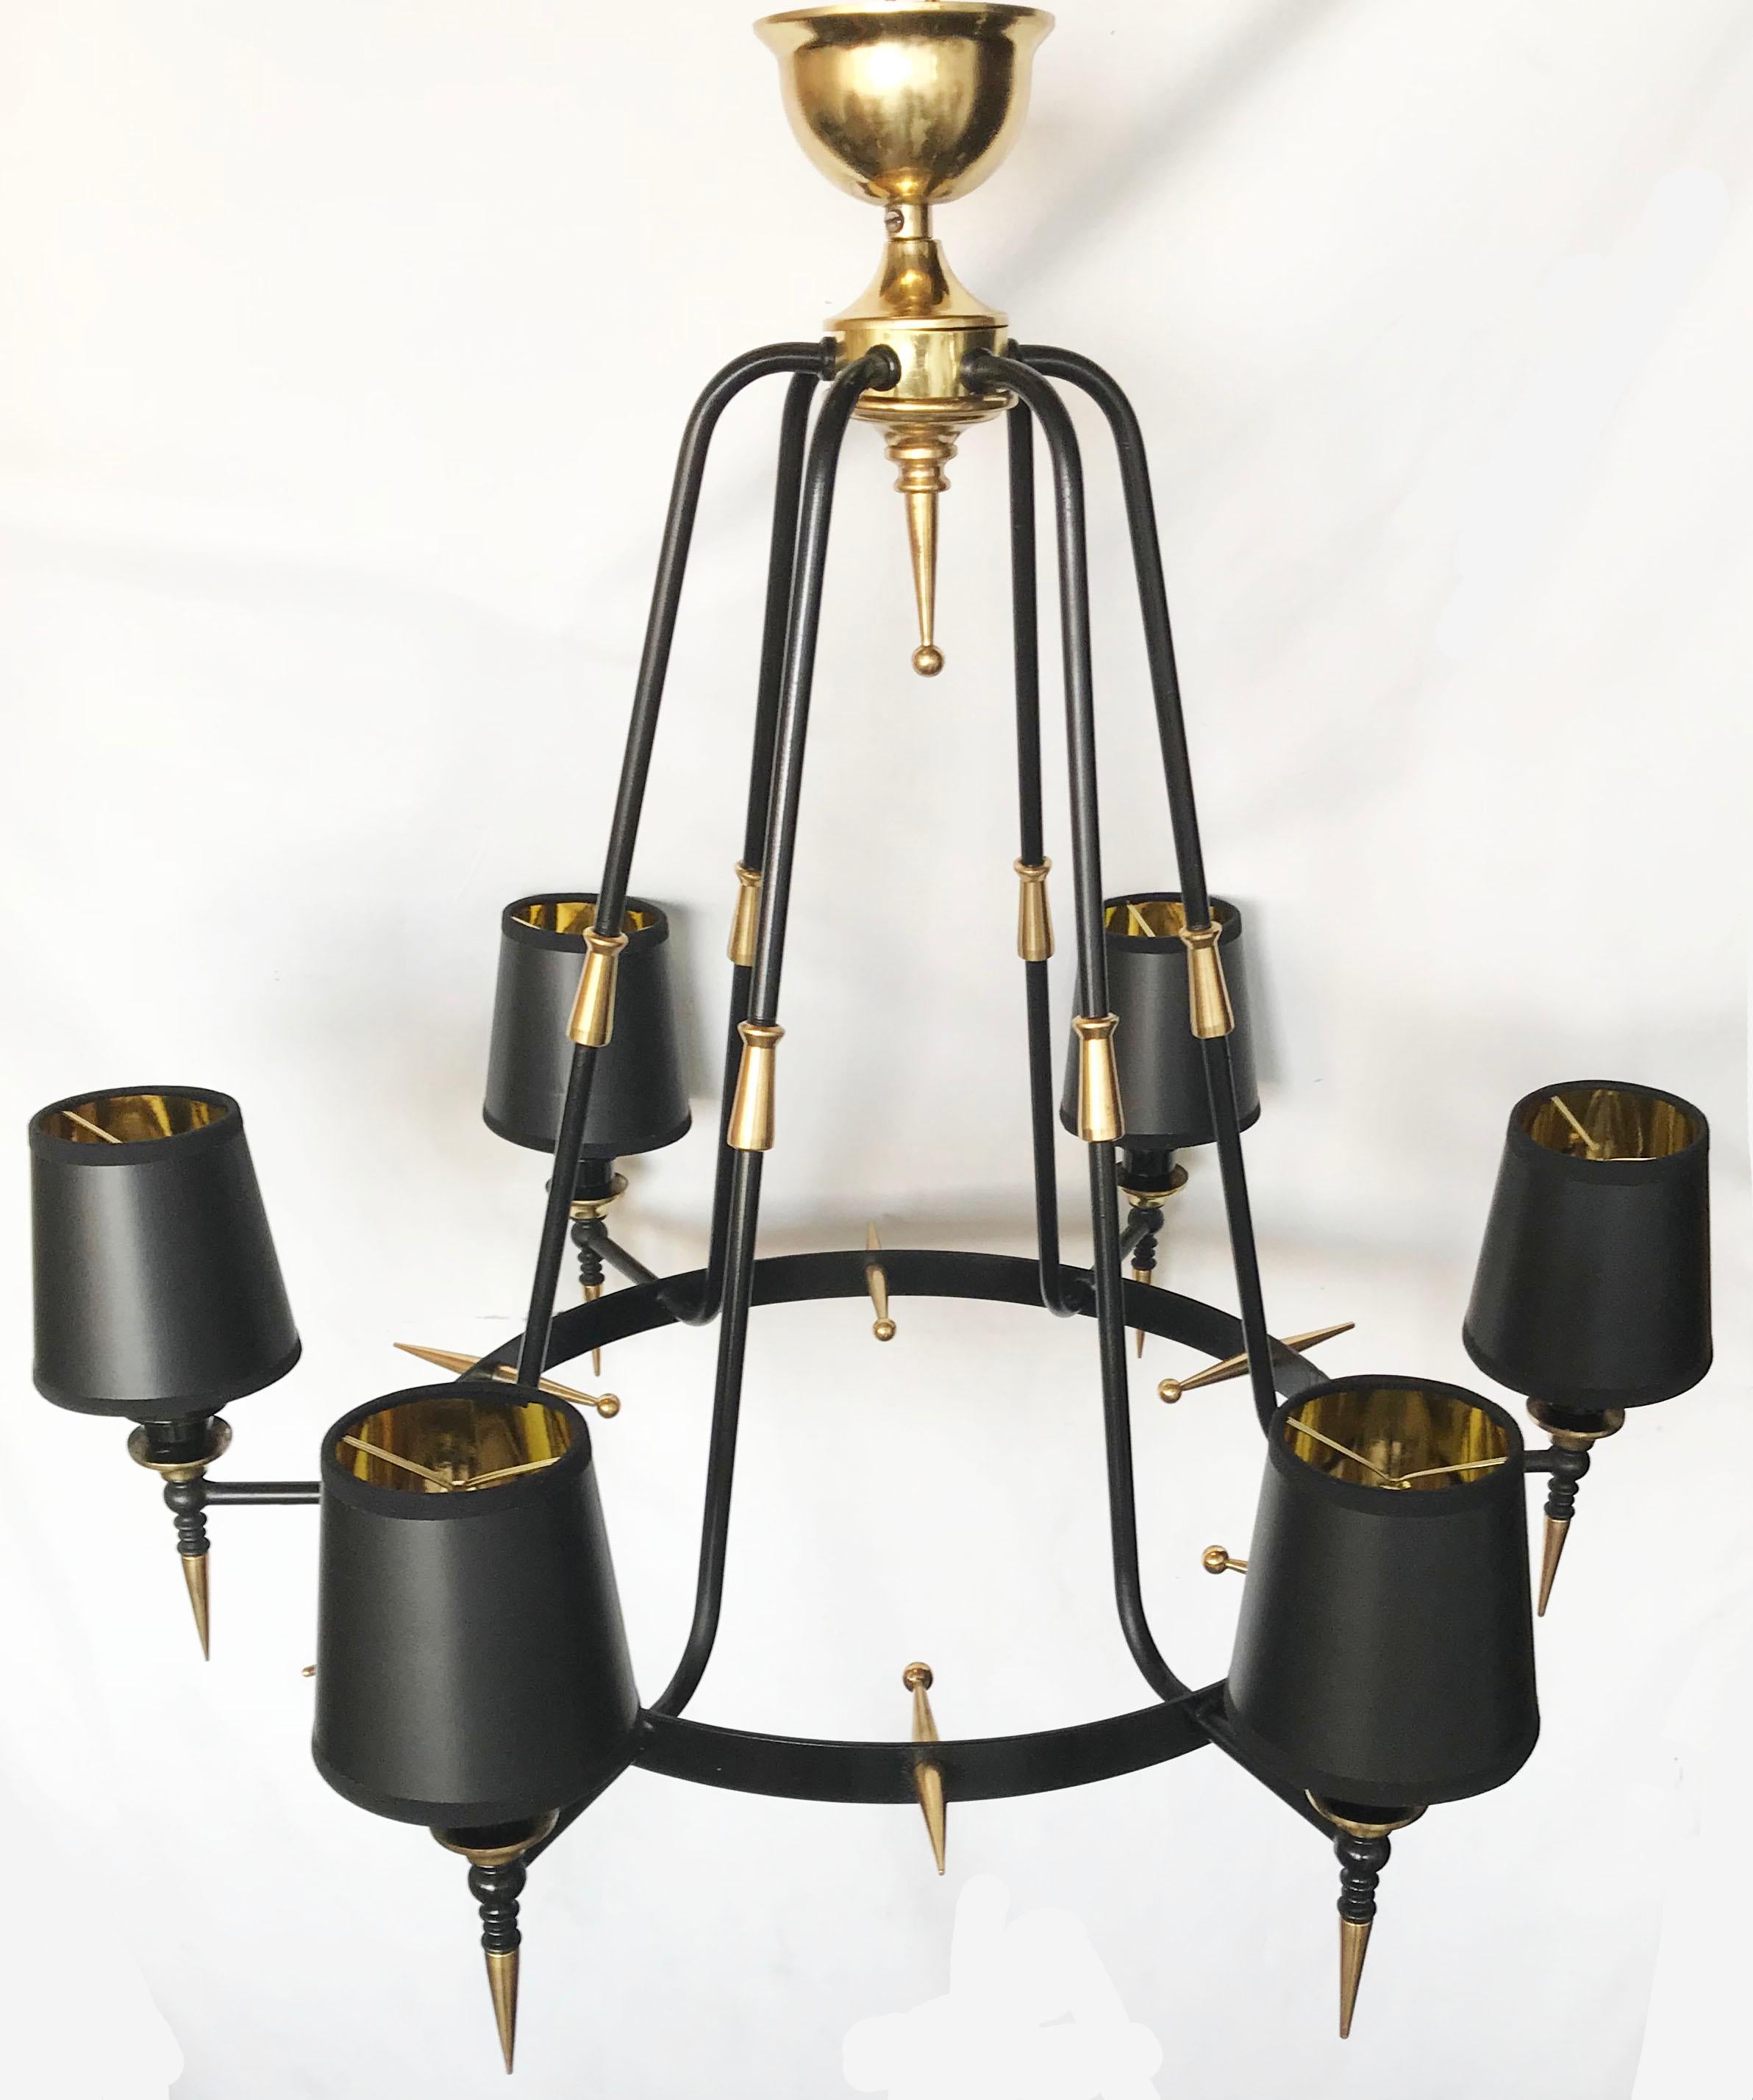 Superb pair of black and brass Finish Stilnovo style Chandeliers.
6 Lights , 40 watts max per lights.
US rewired and in working condition.
Completely restored and refinished.